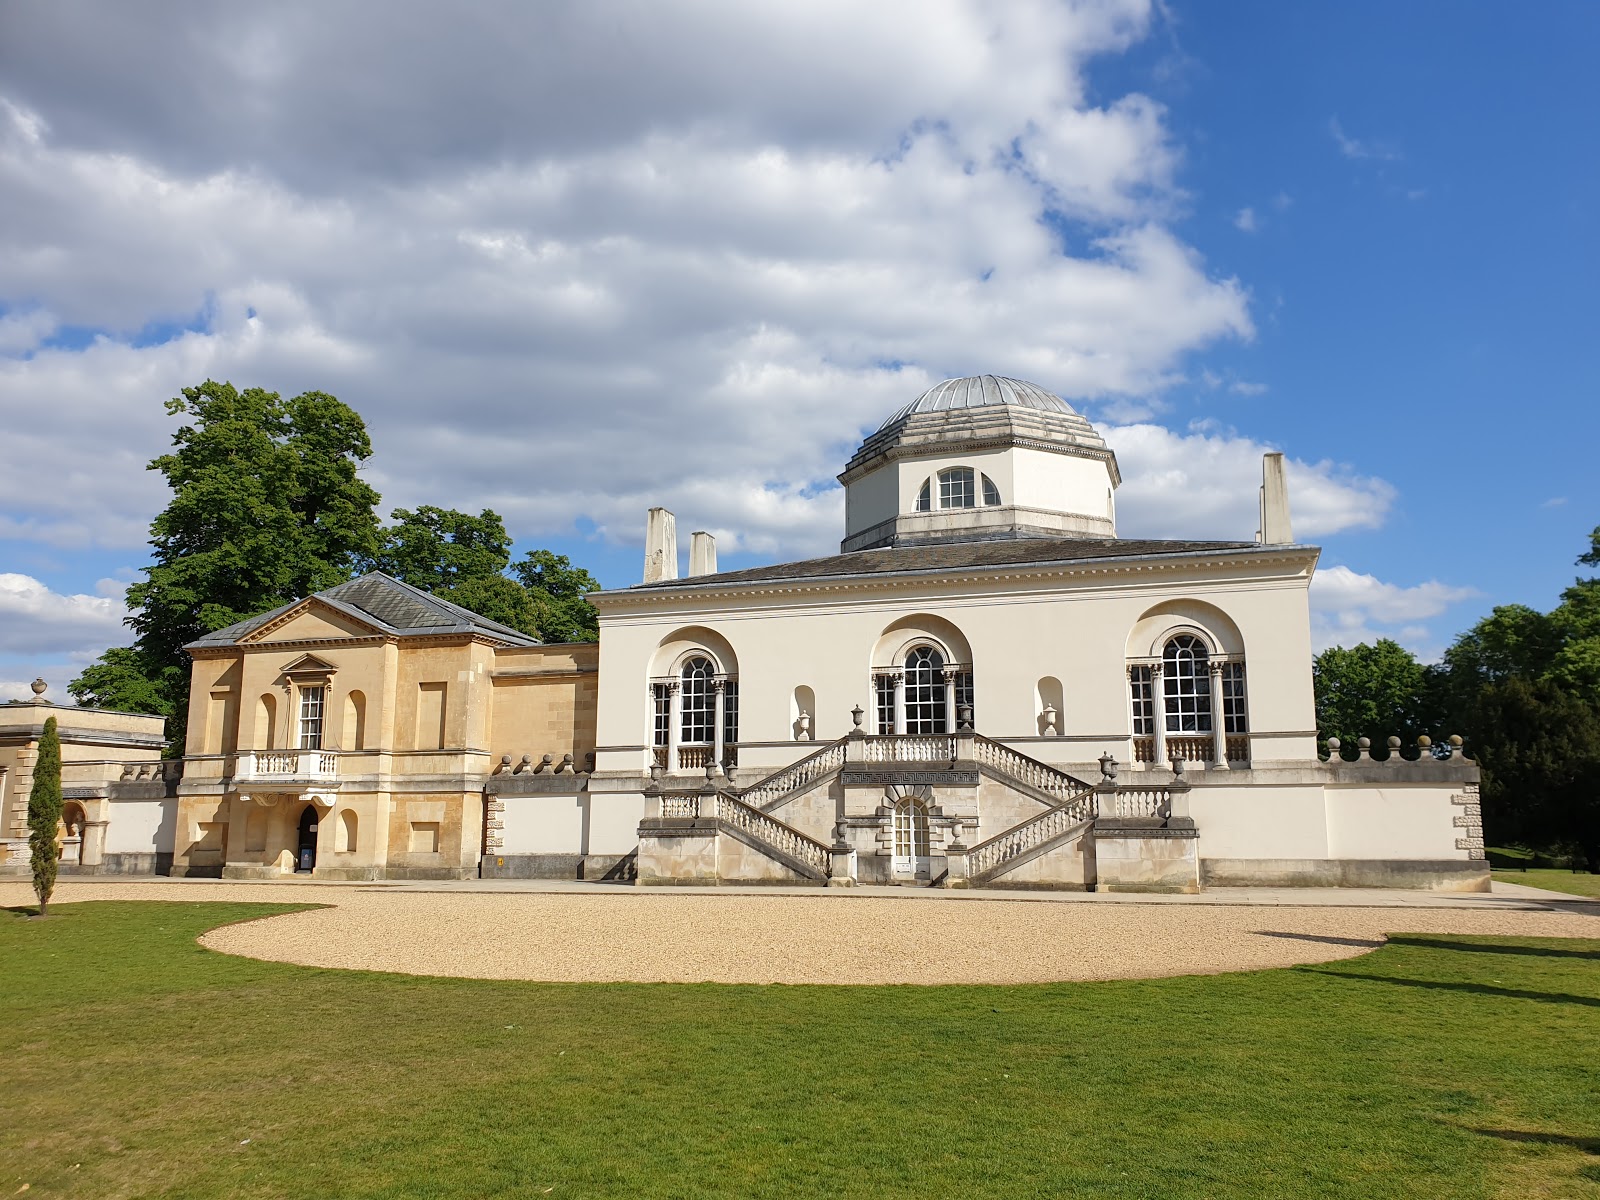 https://whatremovals.co.uk/wp-content/uploads/2022/02/Chiswick House and Gardens-300x225.jpeg